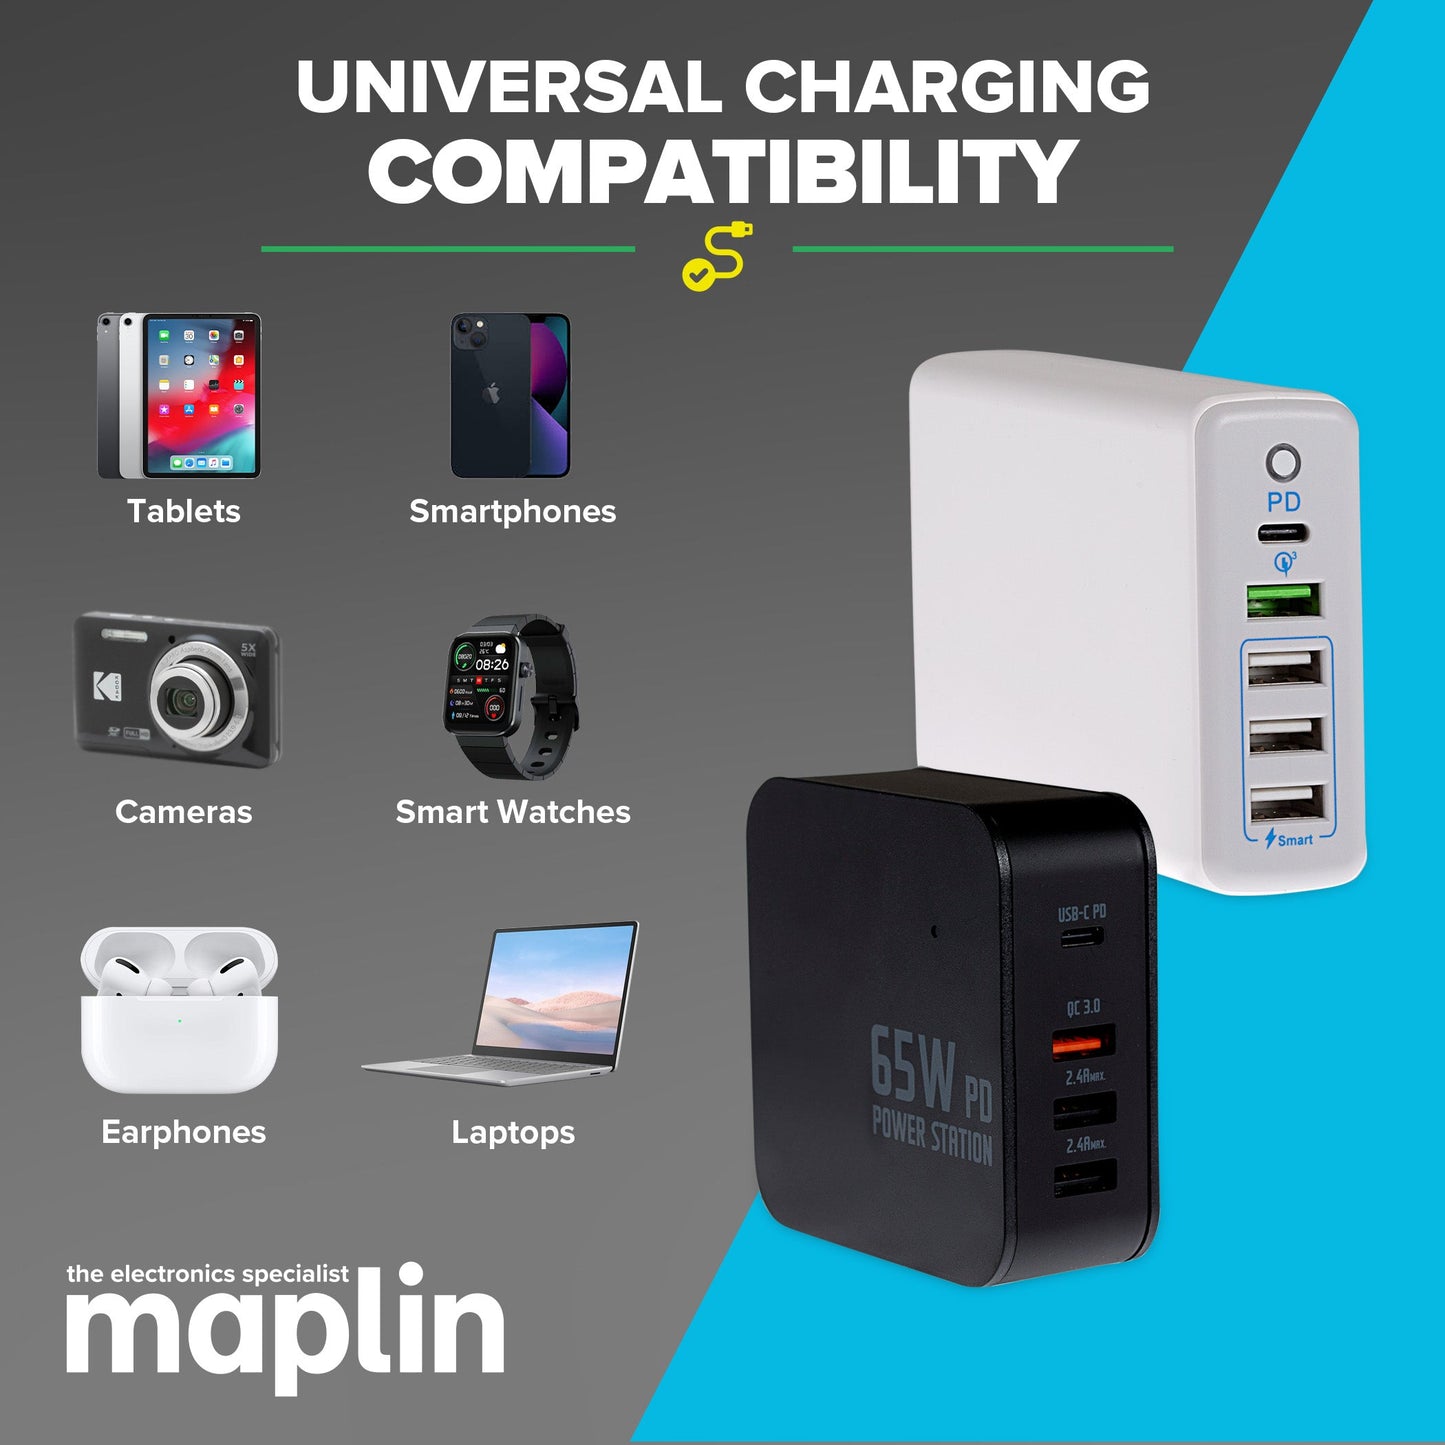 Maplin 4 Port (1 x USB-C PD / 3 x USB-A 3.0 QC) 65W GaN USB Charger with 1.2m Cable - maplin.co.uk